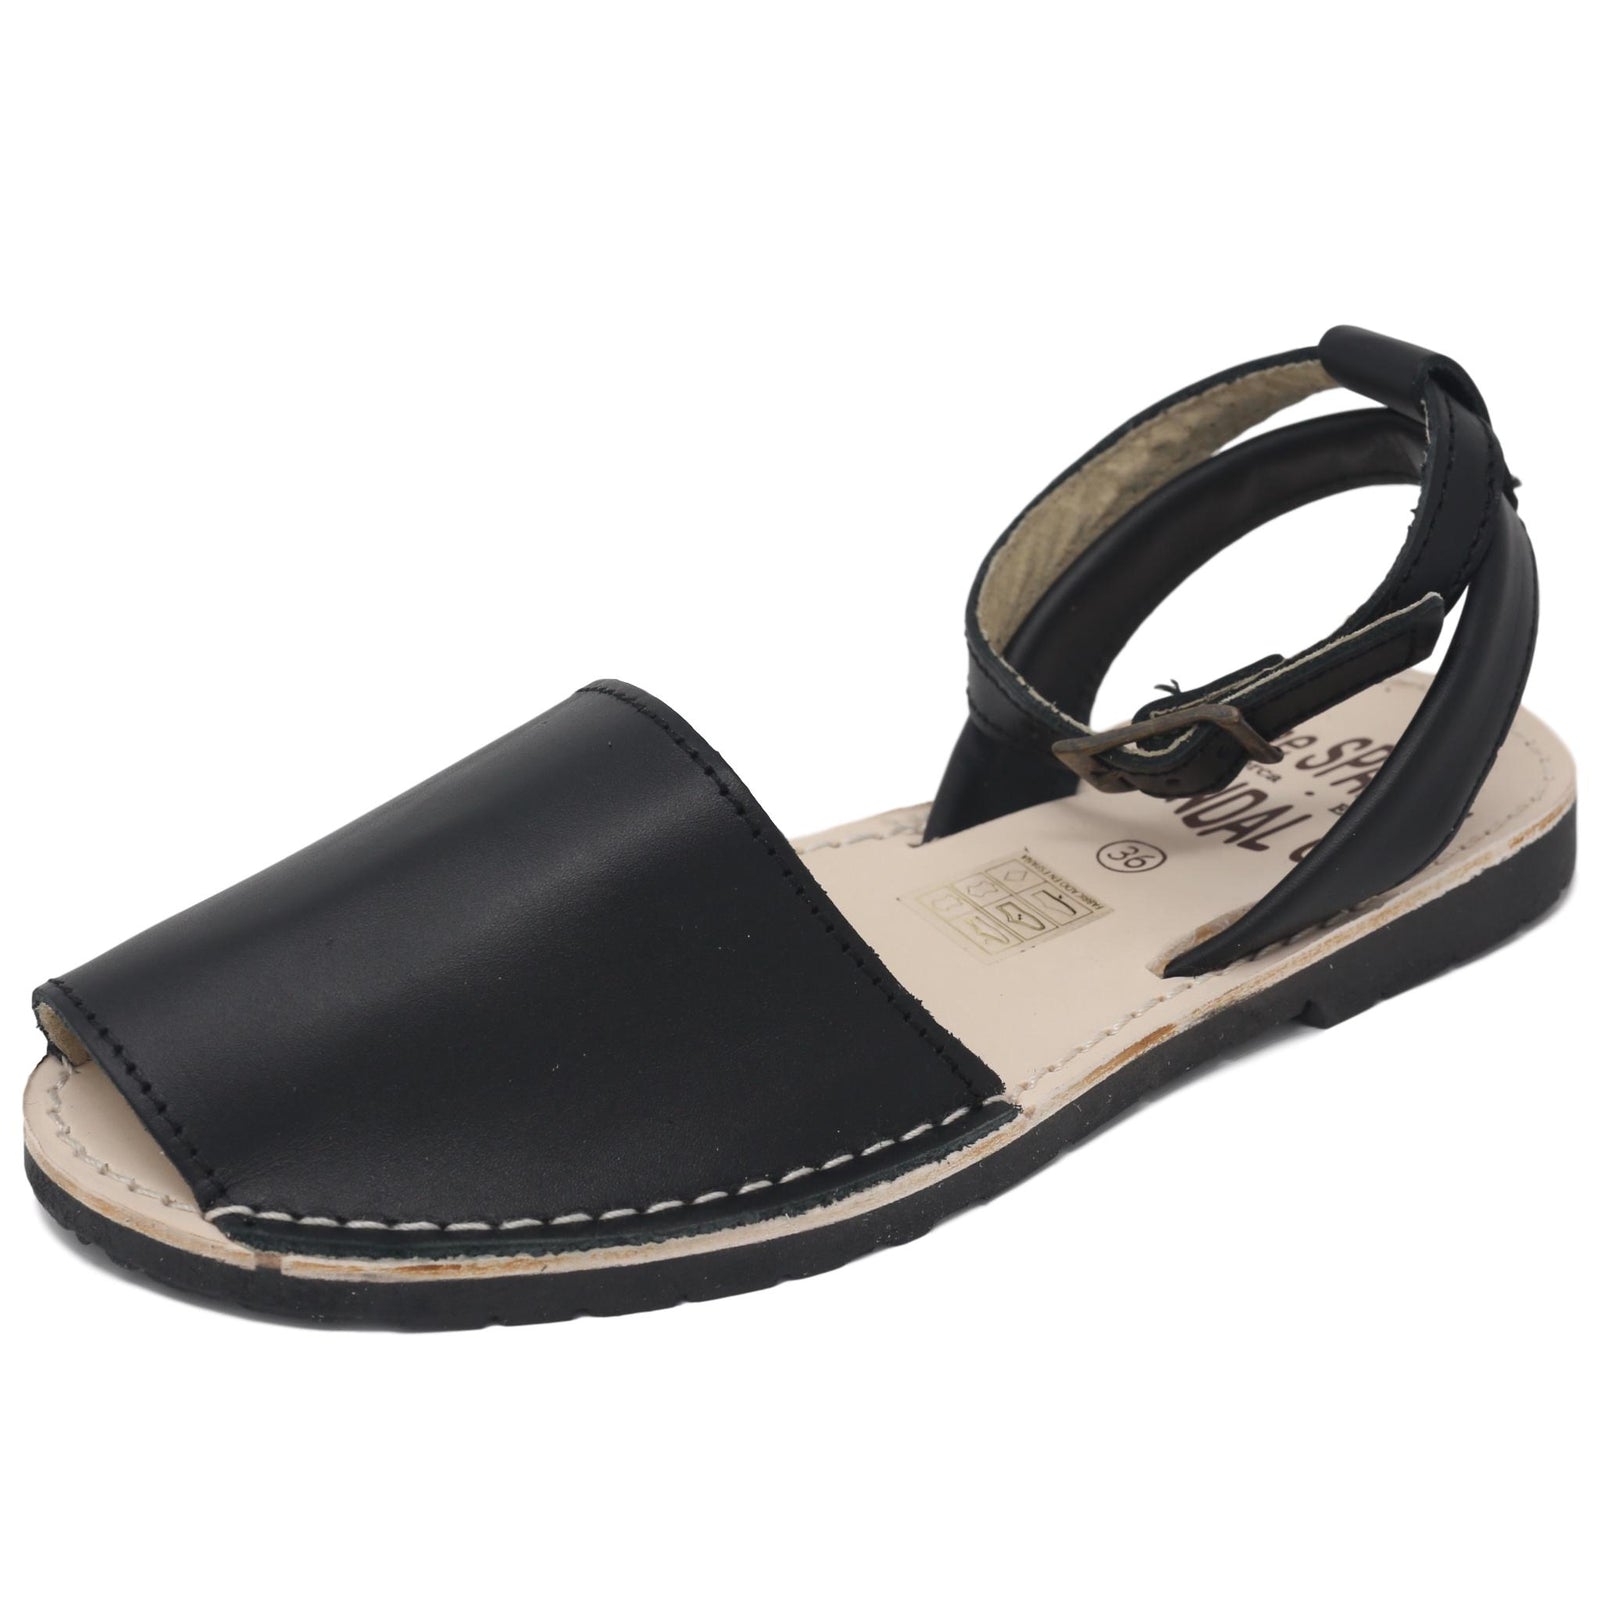 Women collection at The Spanish Sandal Company | Beautiful leather ...